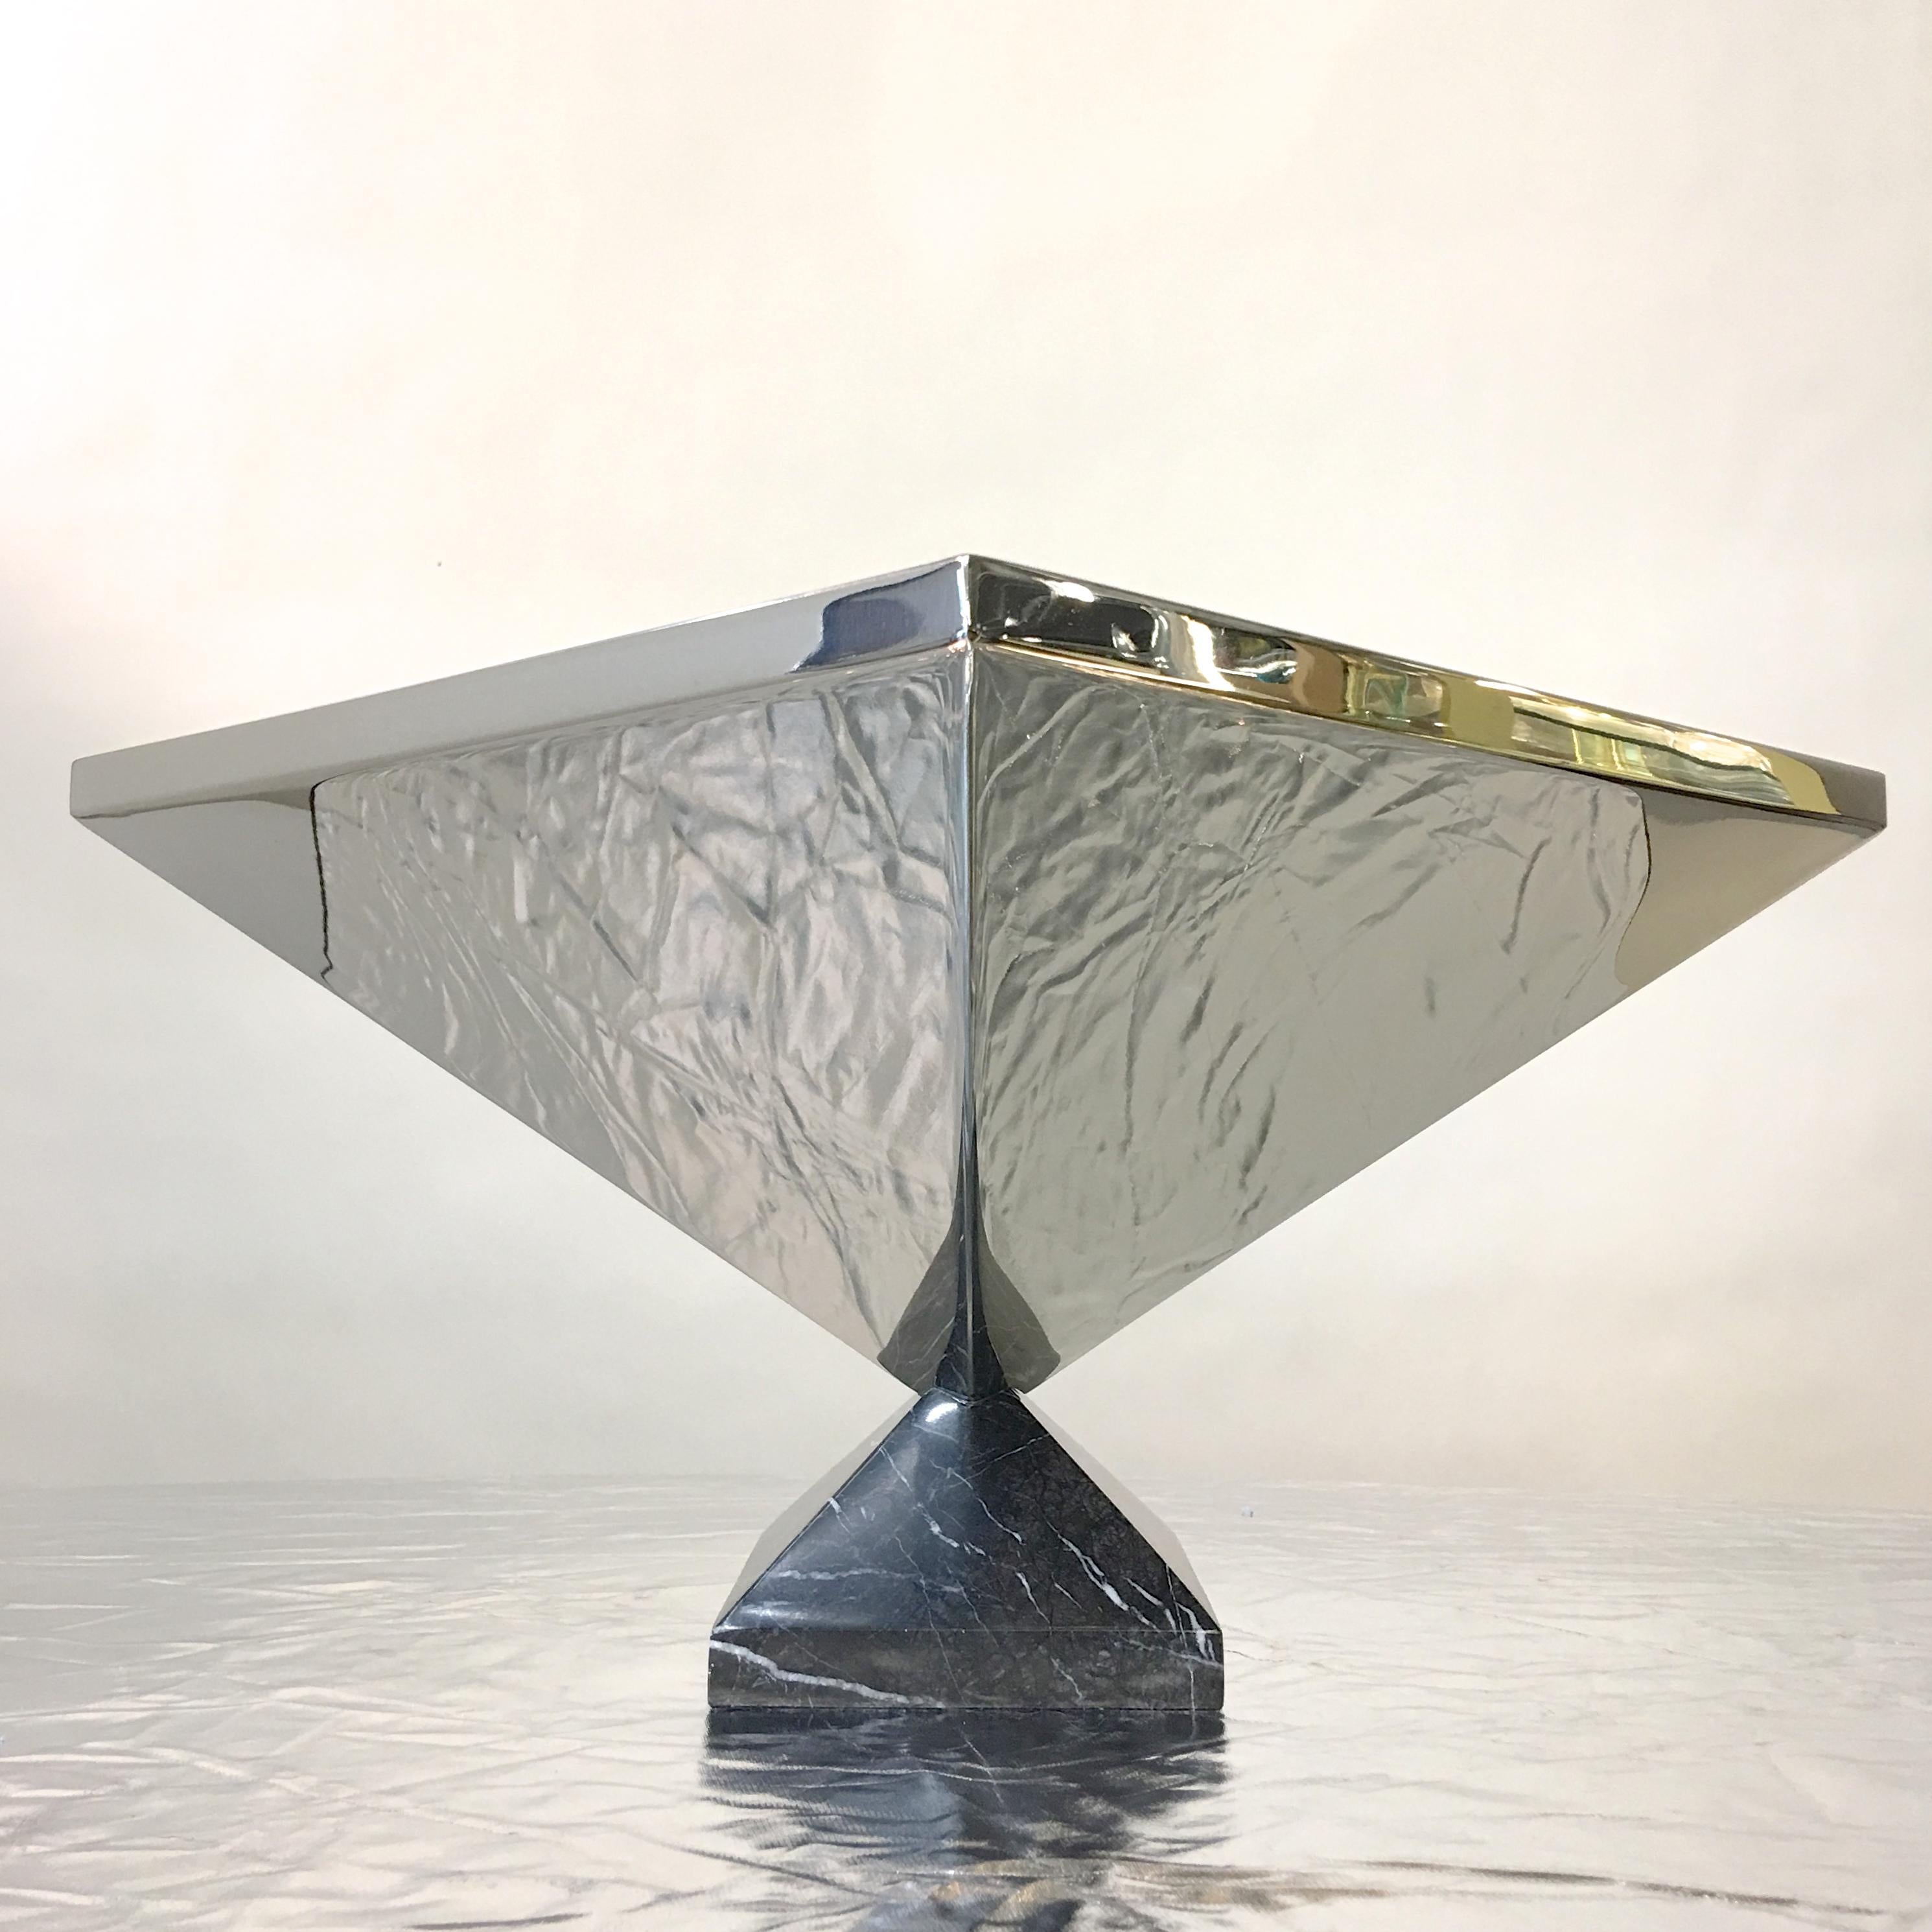 Inverted Pyramid Polished Stainless Centerpiece on Marble Pyramid Base 3